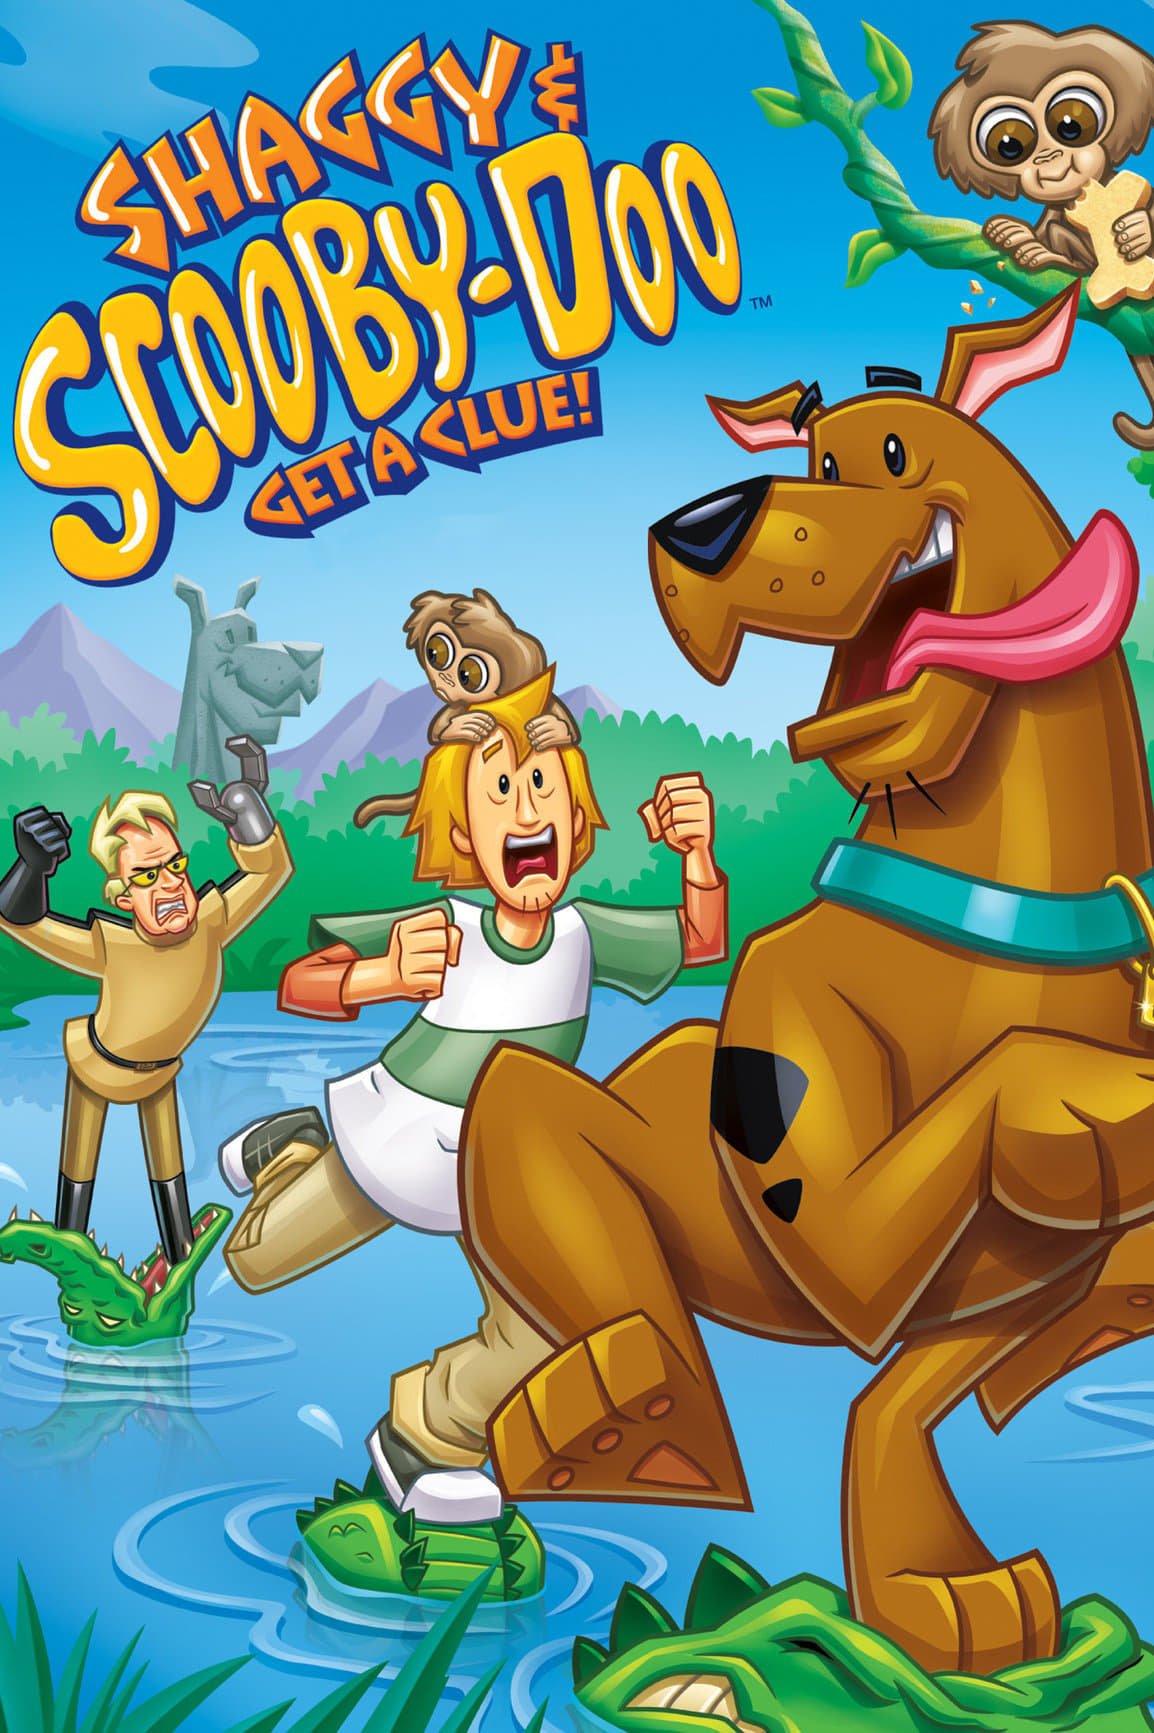 Shaggy & Scooby-Doo Get a Clue! TV Show Poster - ID: 400164 - Image Abyss